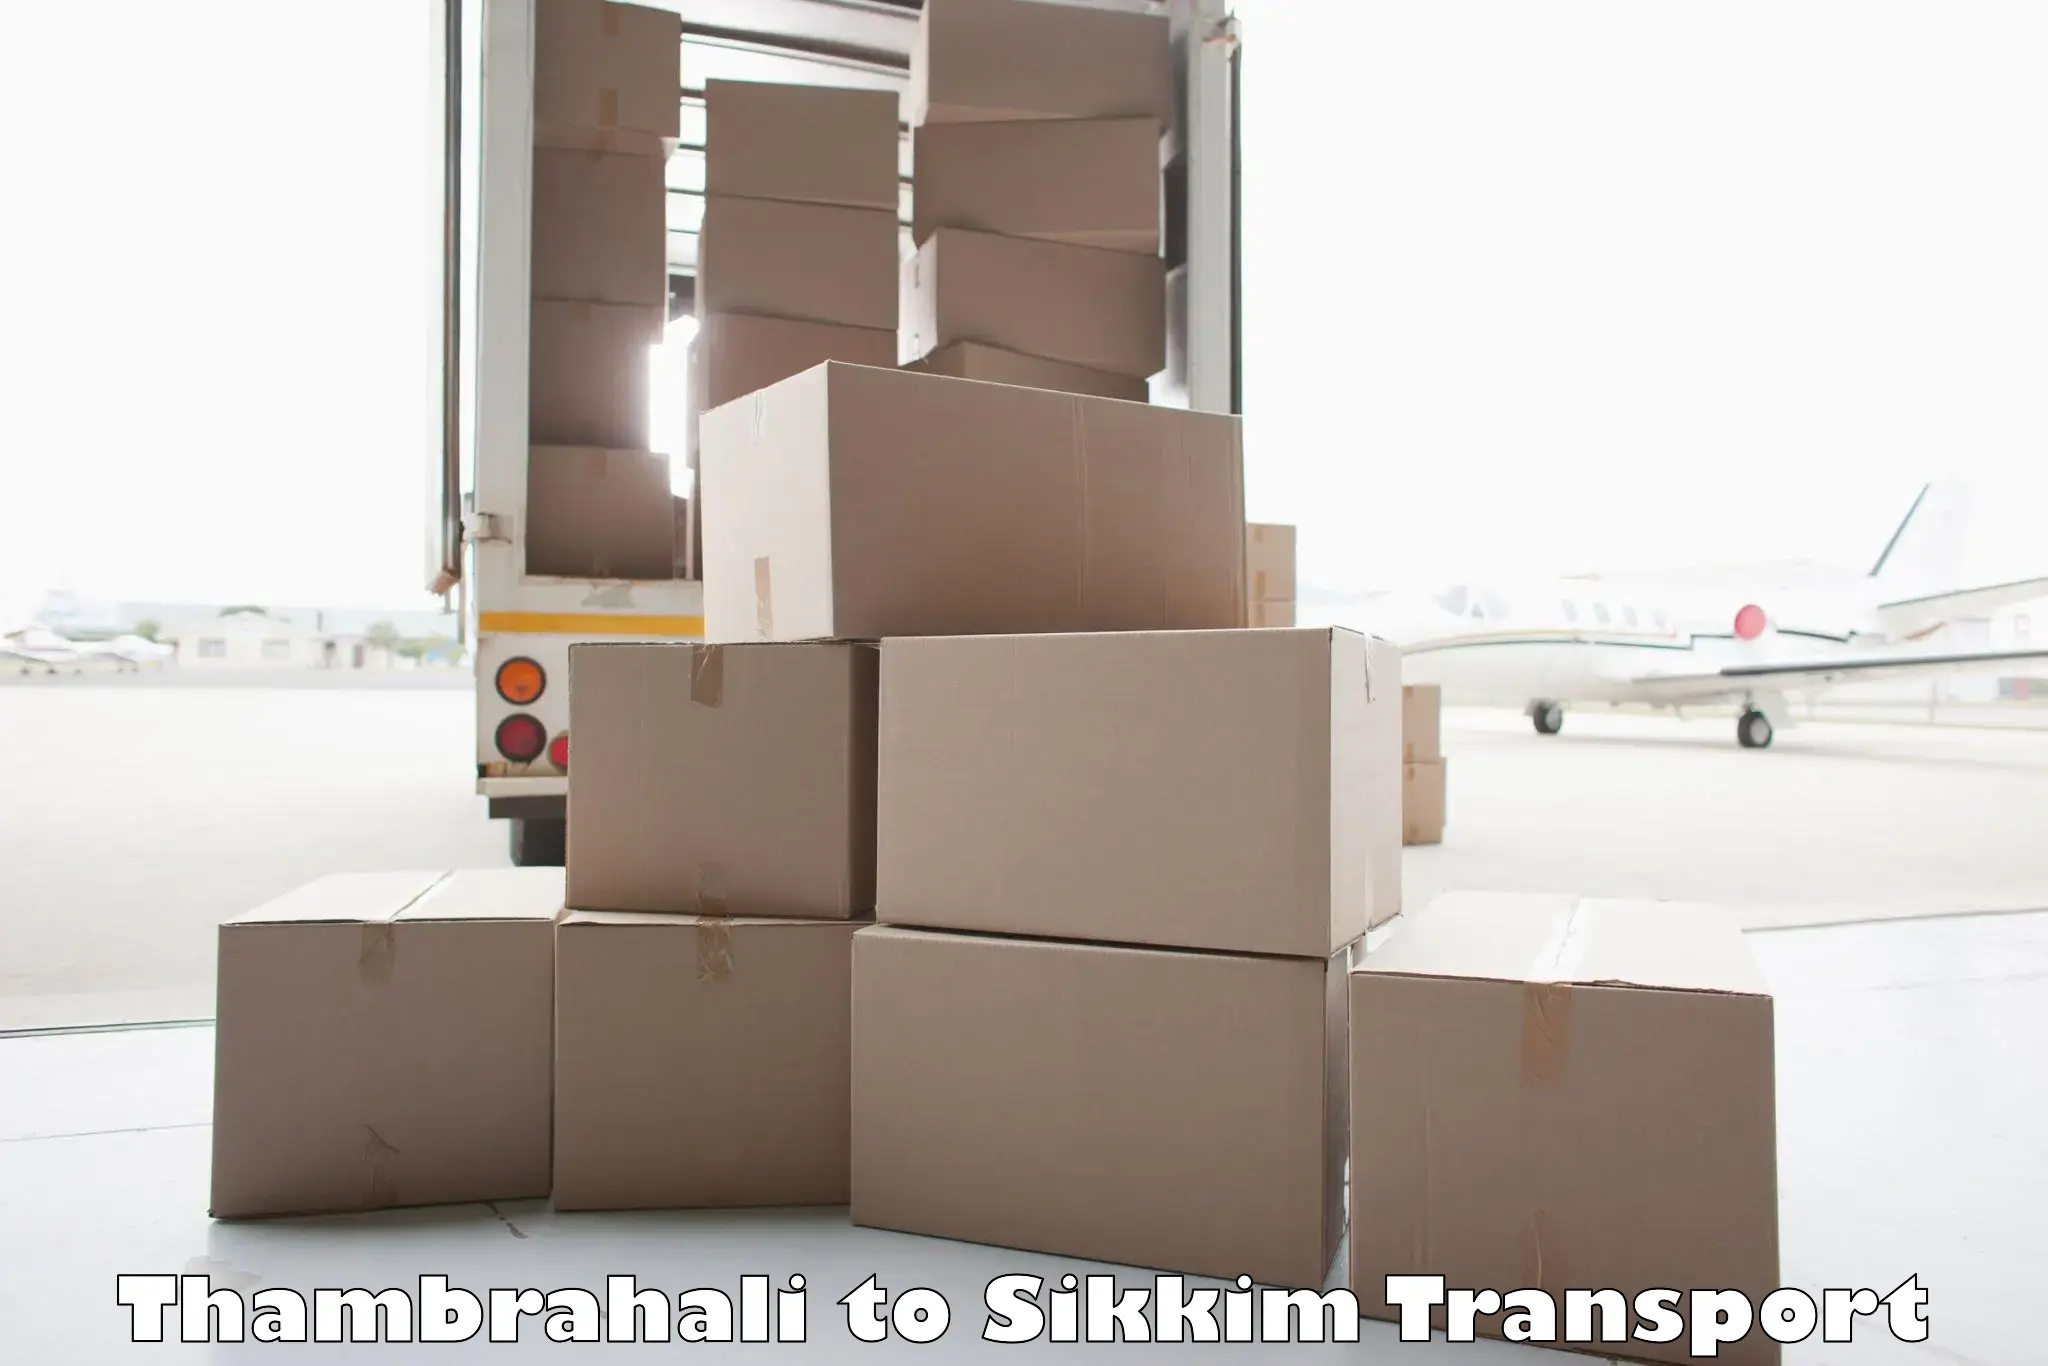 Cargo transport services Thambrahali to Pelling